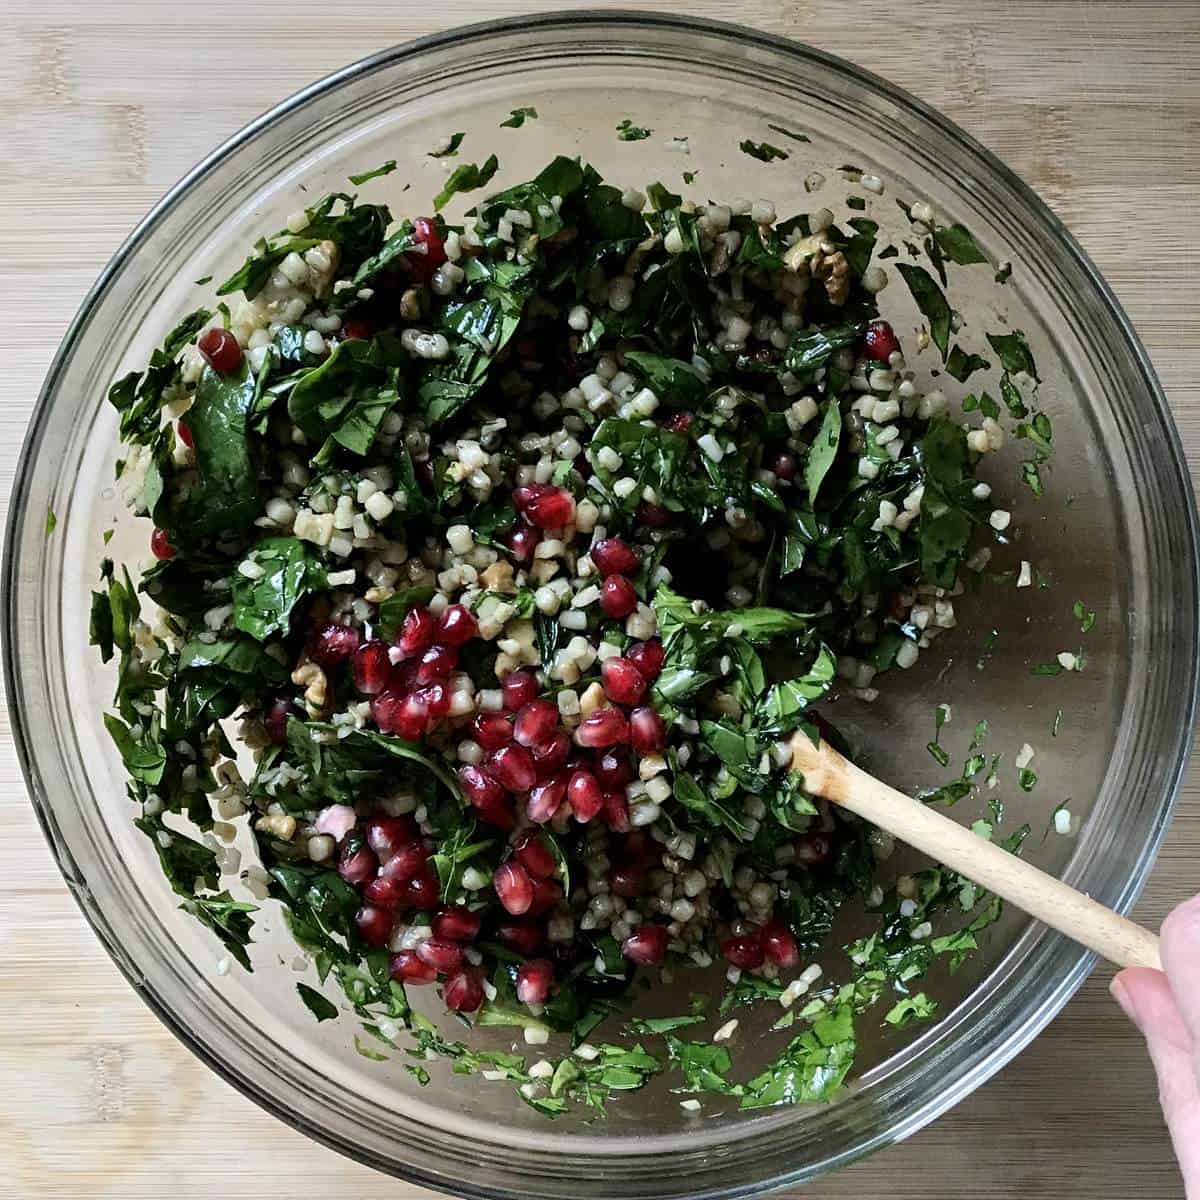 Pomegranate arils added to a spinach salad with fregola.